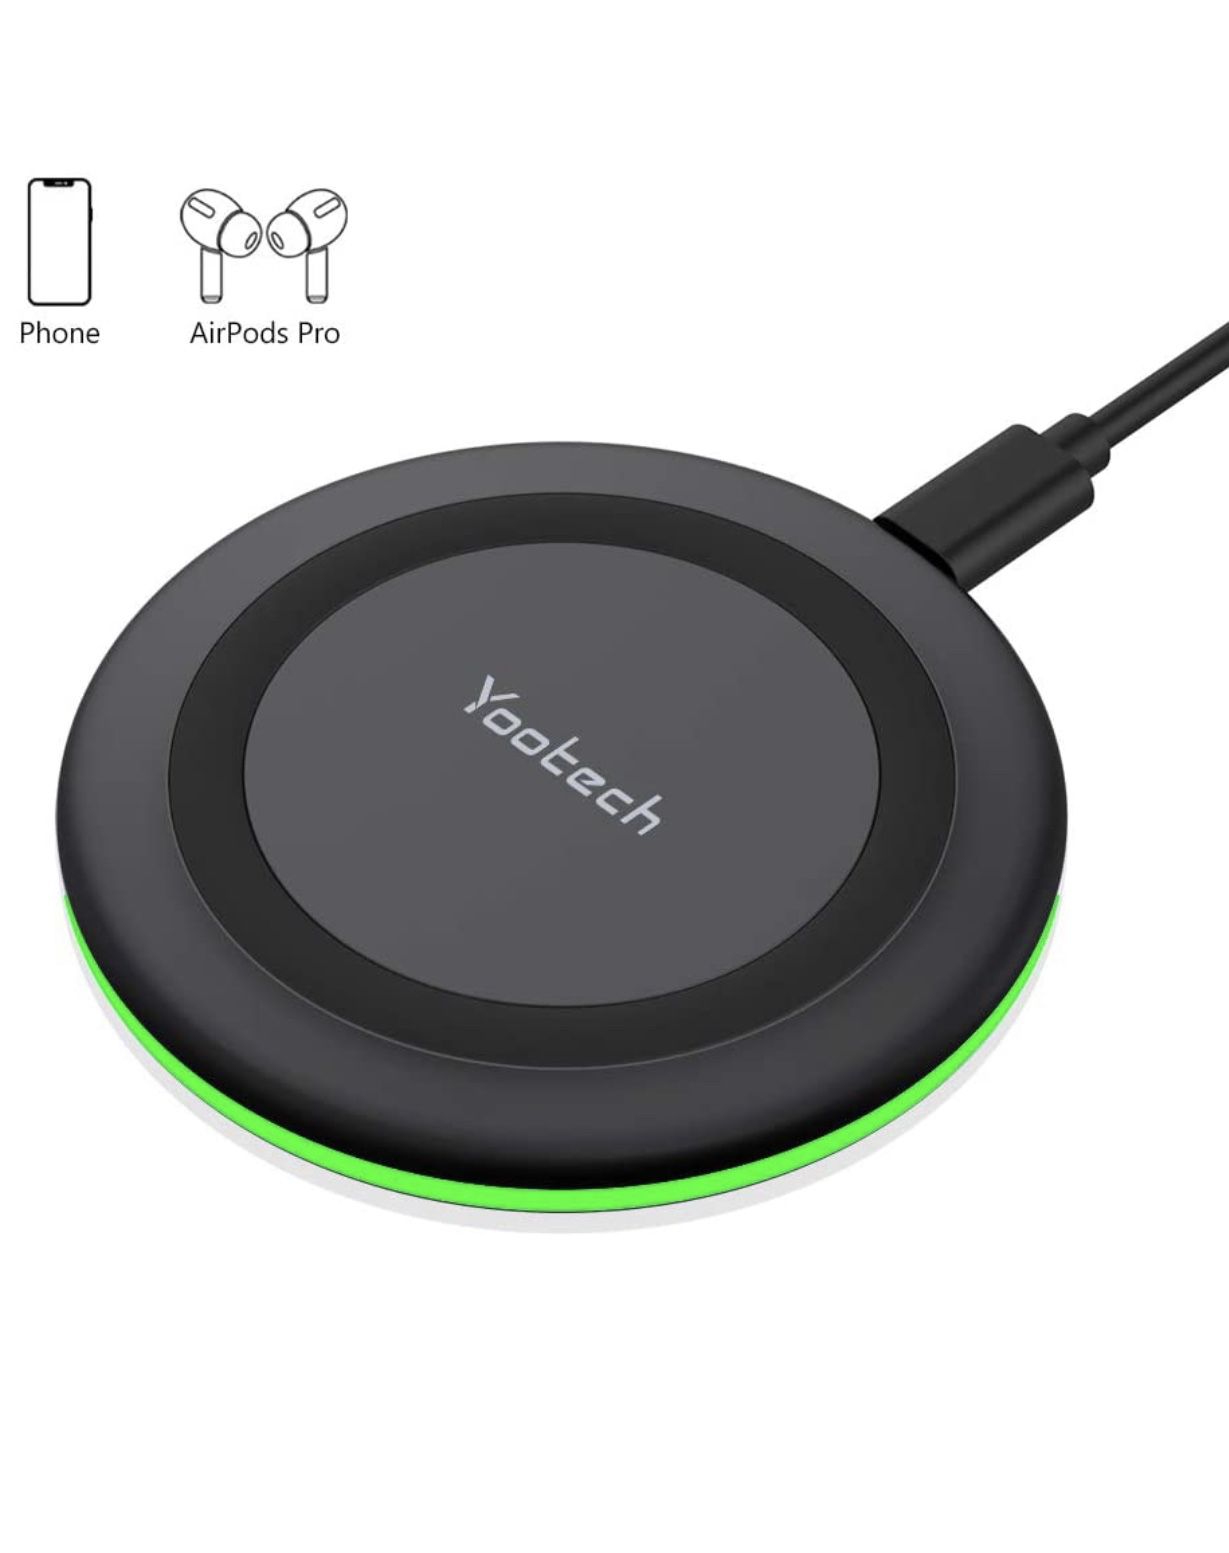 Yootech Wireless Charger,Qi-Certified 10W Max Fast Wireless Charging Pad Compatible with iPhone SE 2020/11/11 Pro/11 Pro Max/XR/XS/X/8,Samsung Galaxy